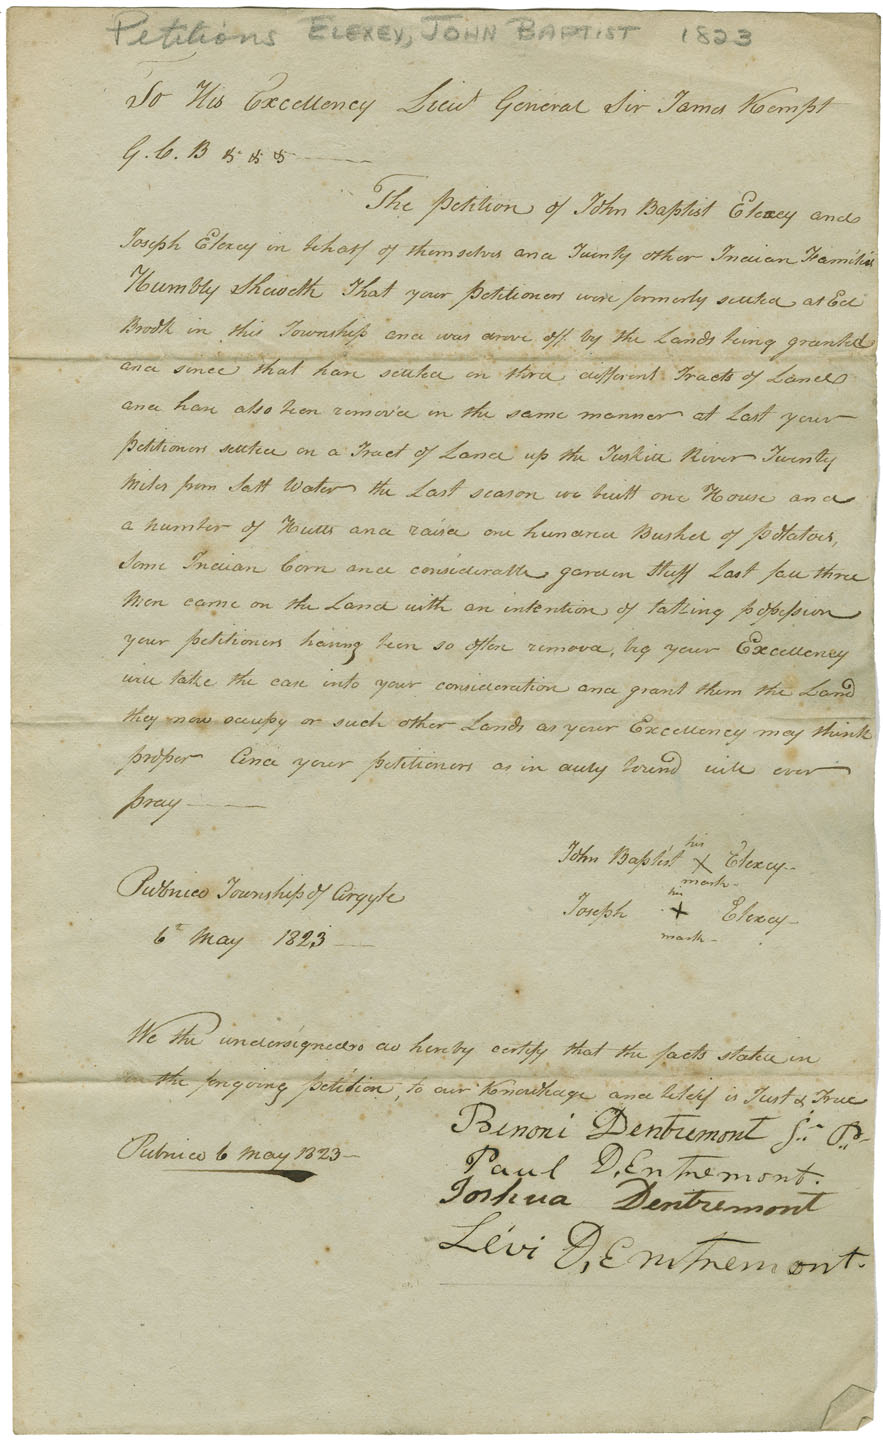 Petition by John Elexey and other Mi'kmaq on behalf of themselves and twenty other Mi'kmaq families, asking a grant of land on which they have settled at Pubnico, twennty miles back from salt water. They have built a house, several huts and raised a hundred bushels of potatoes, Indian corn and garden stuff.